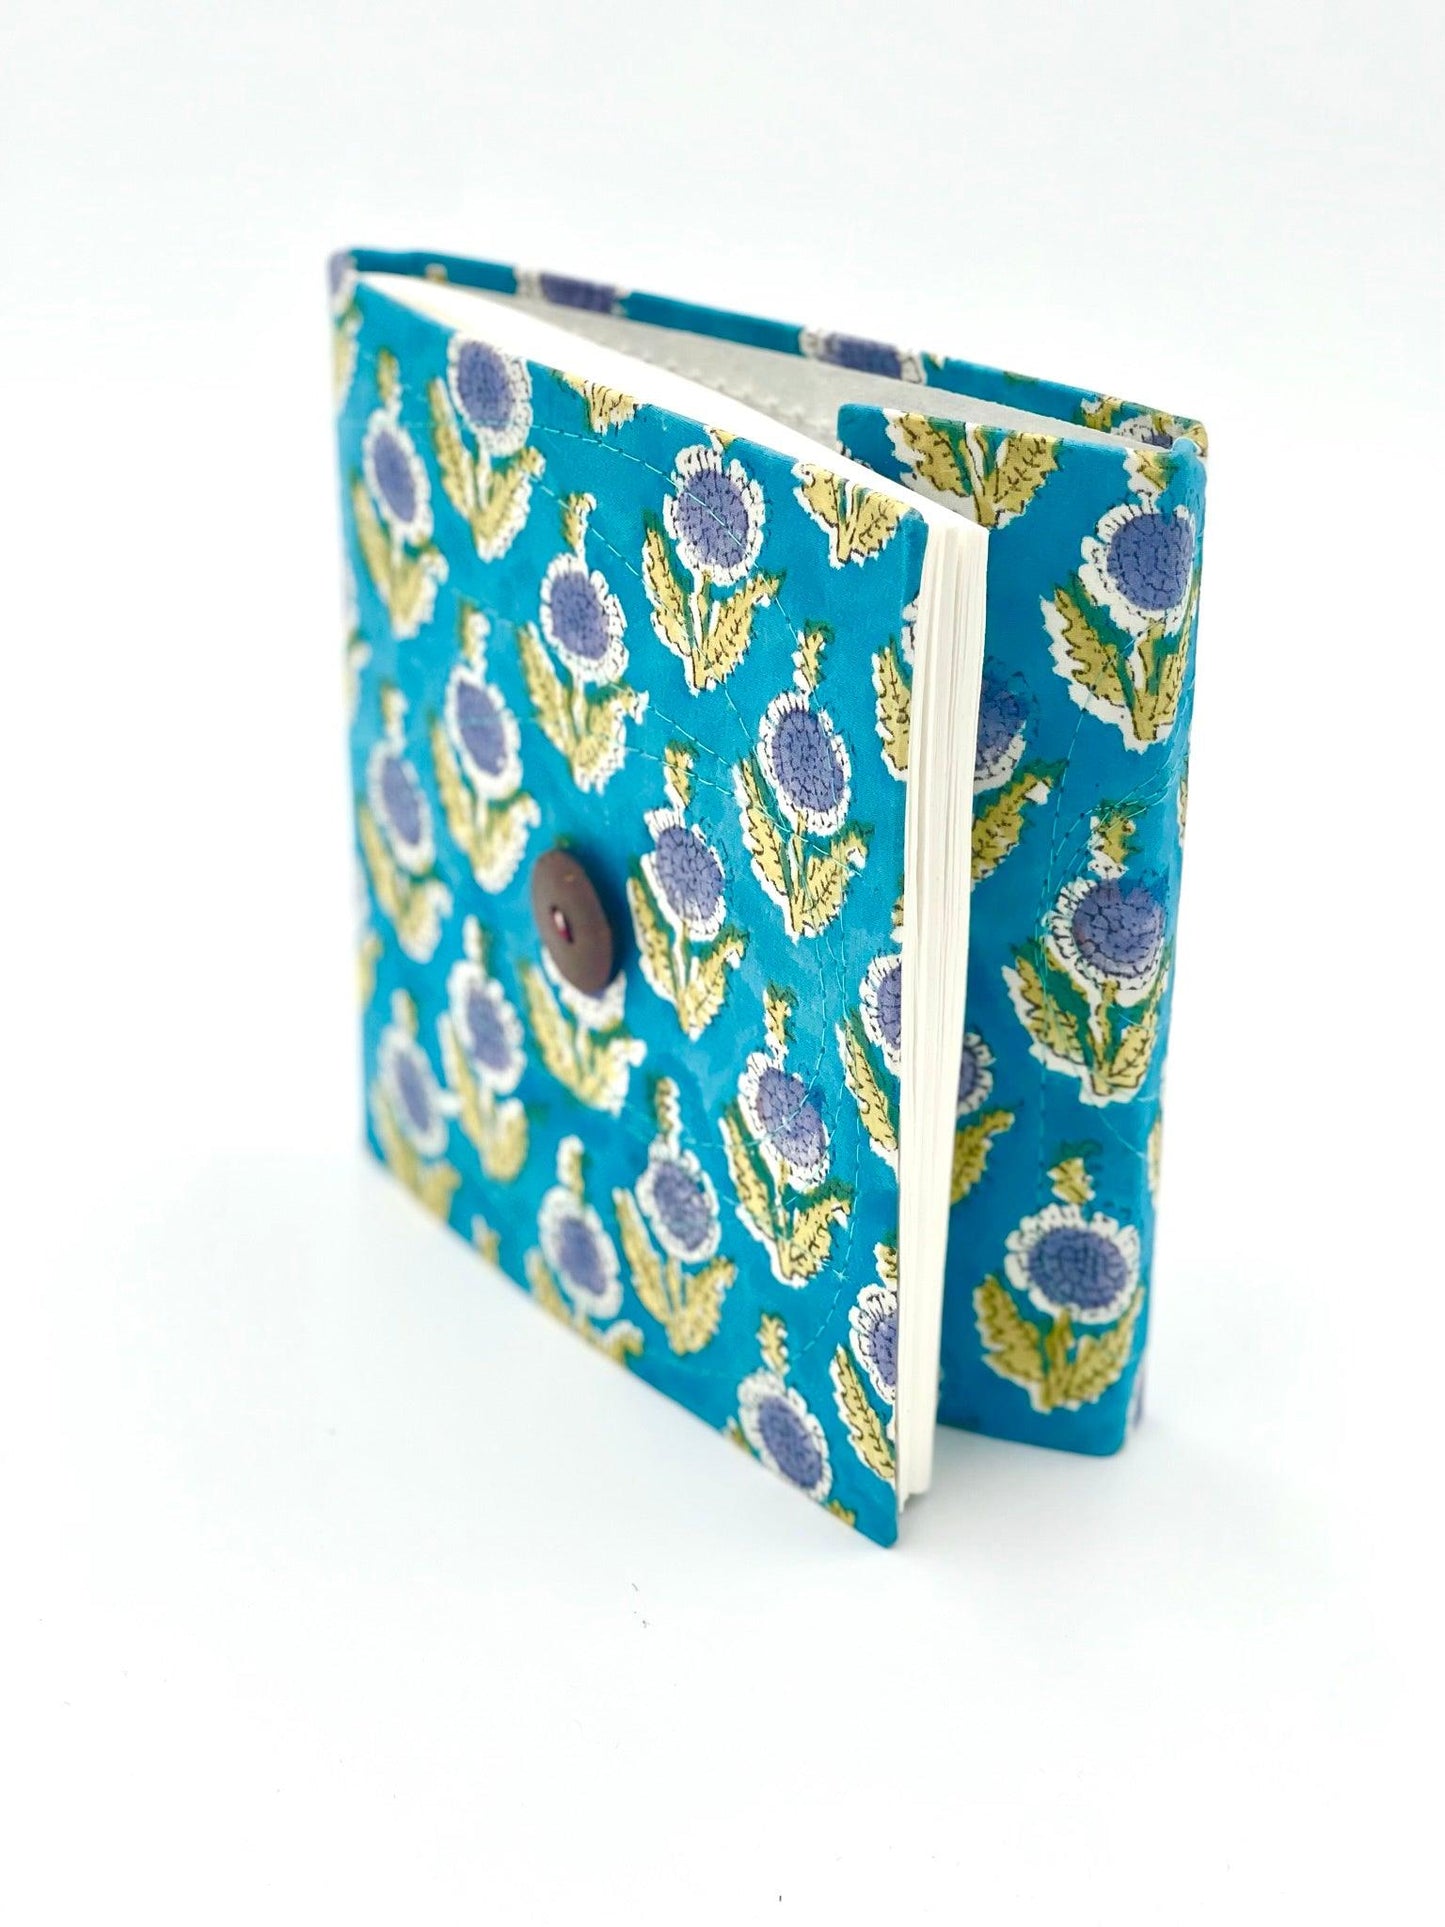 Block Print Journal/Notebook, Blue & Purple Wildflower - Unlined, 100 Pages, Thick Paper, Hard Cover - Transcend